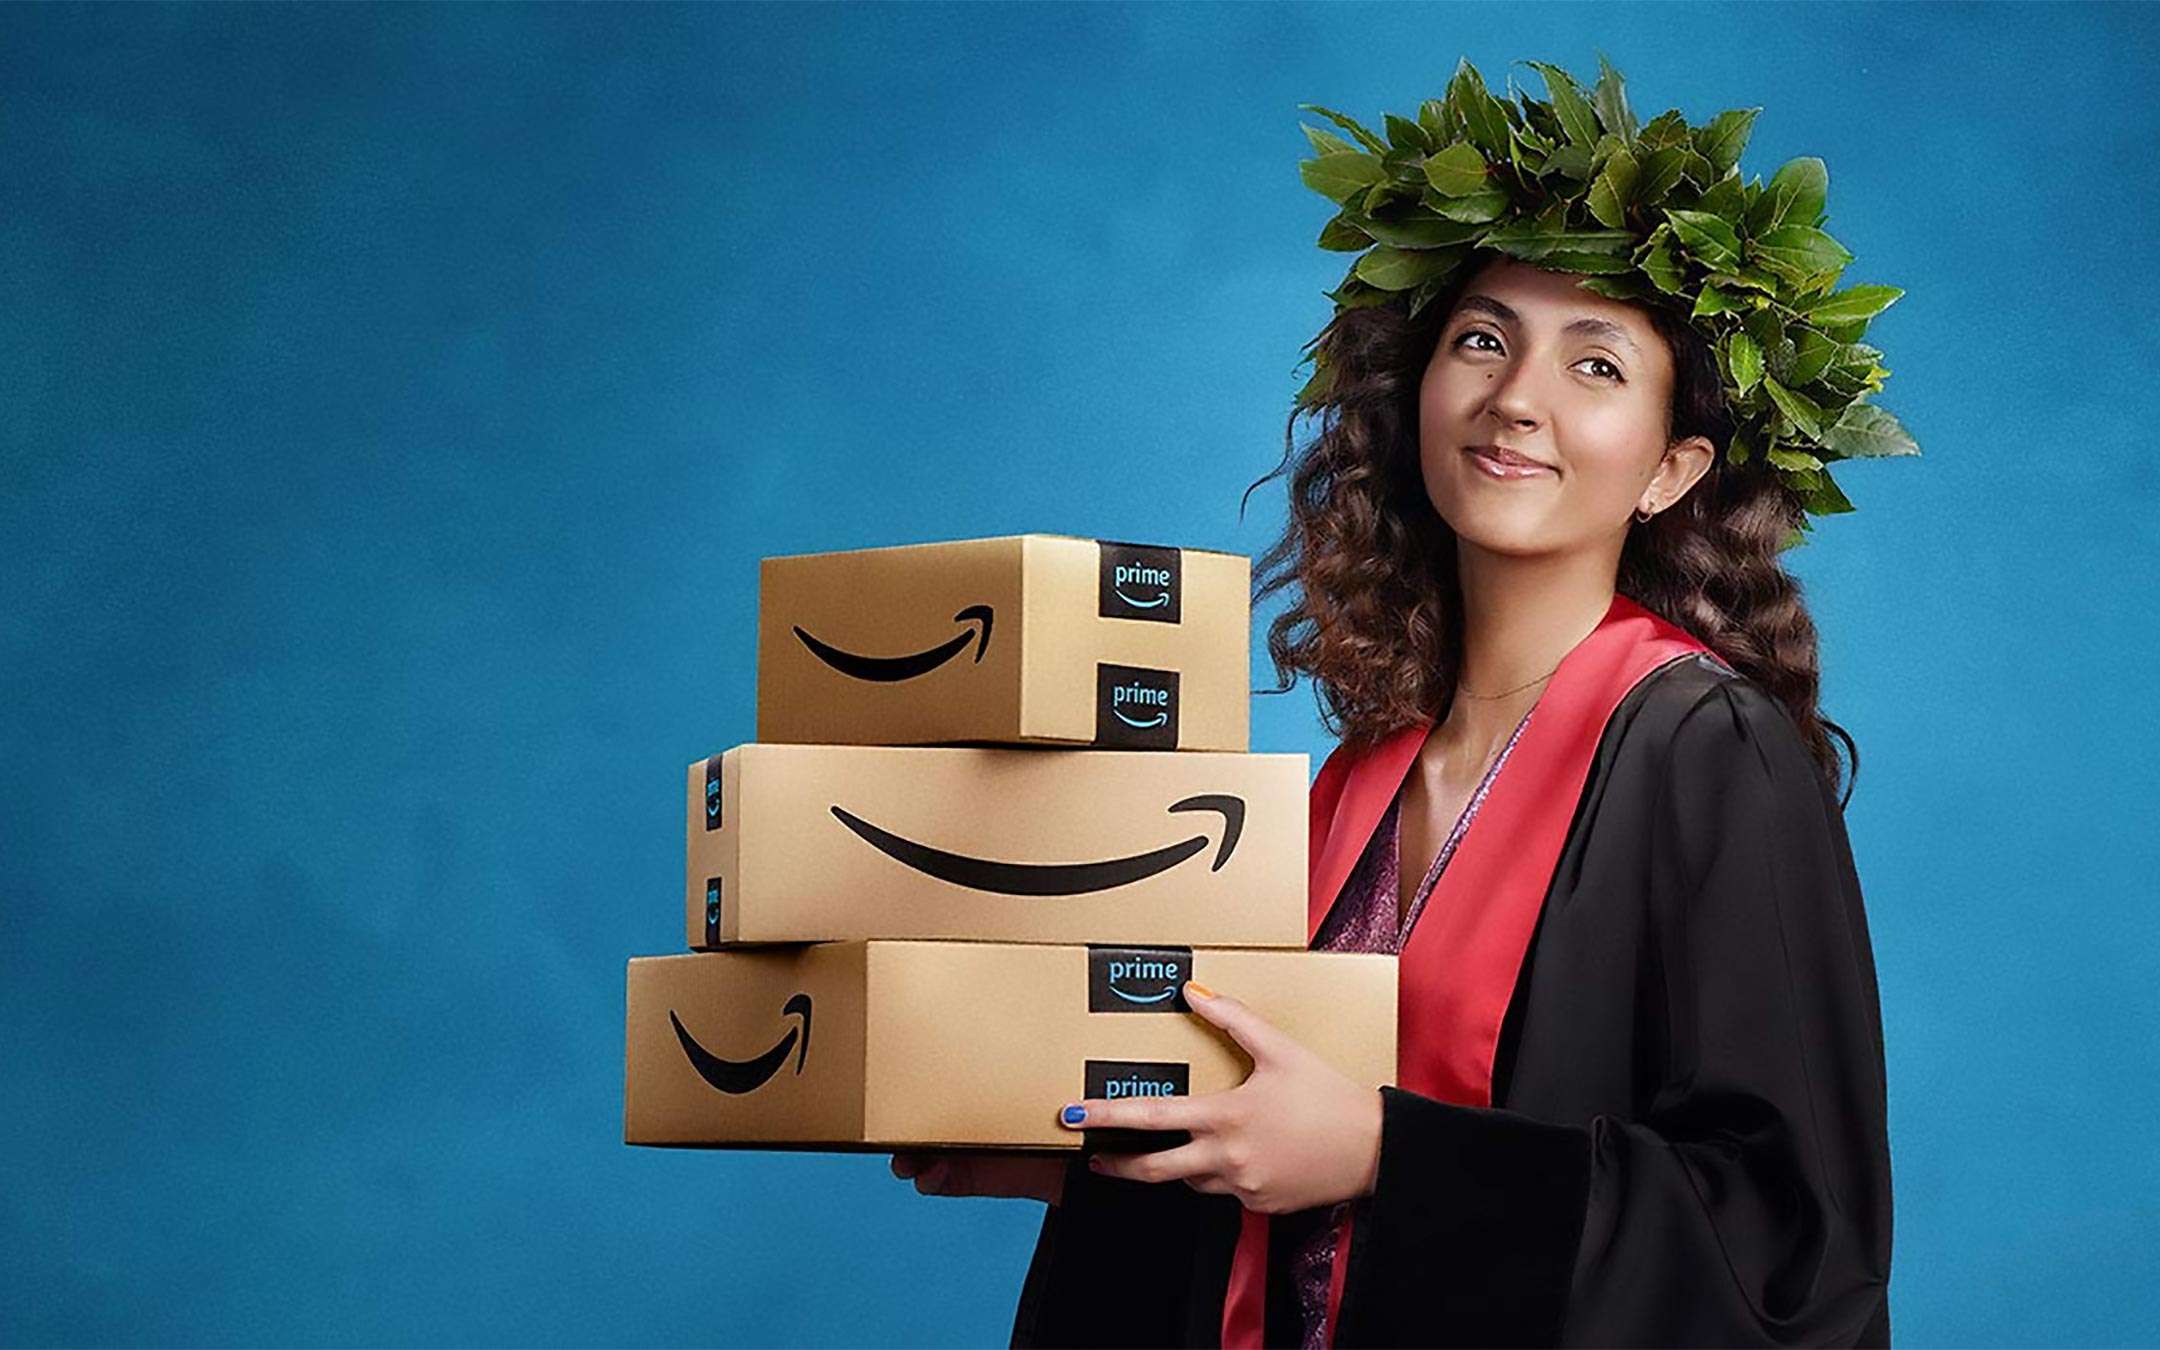 Amazon Prime Student is free for 90 days